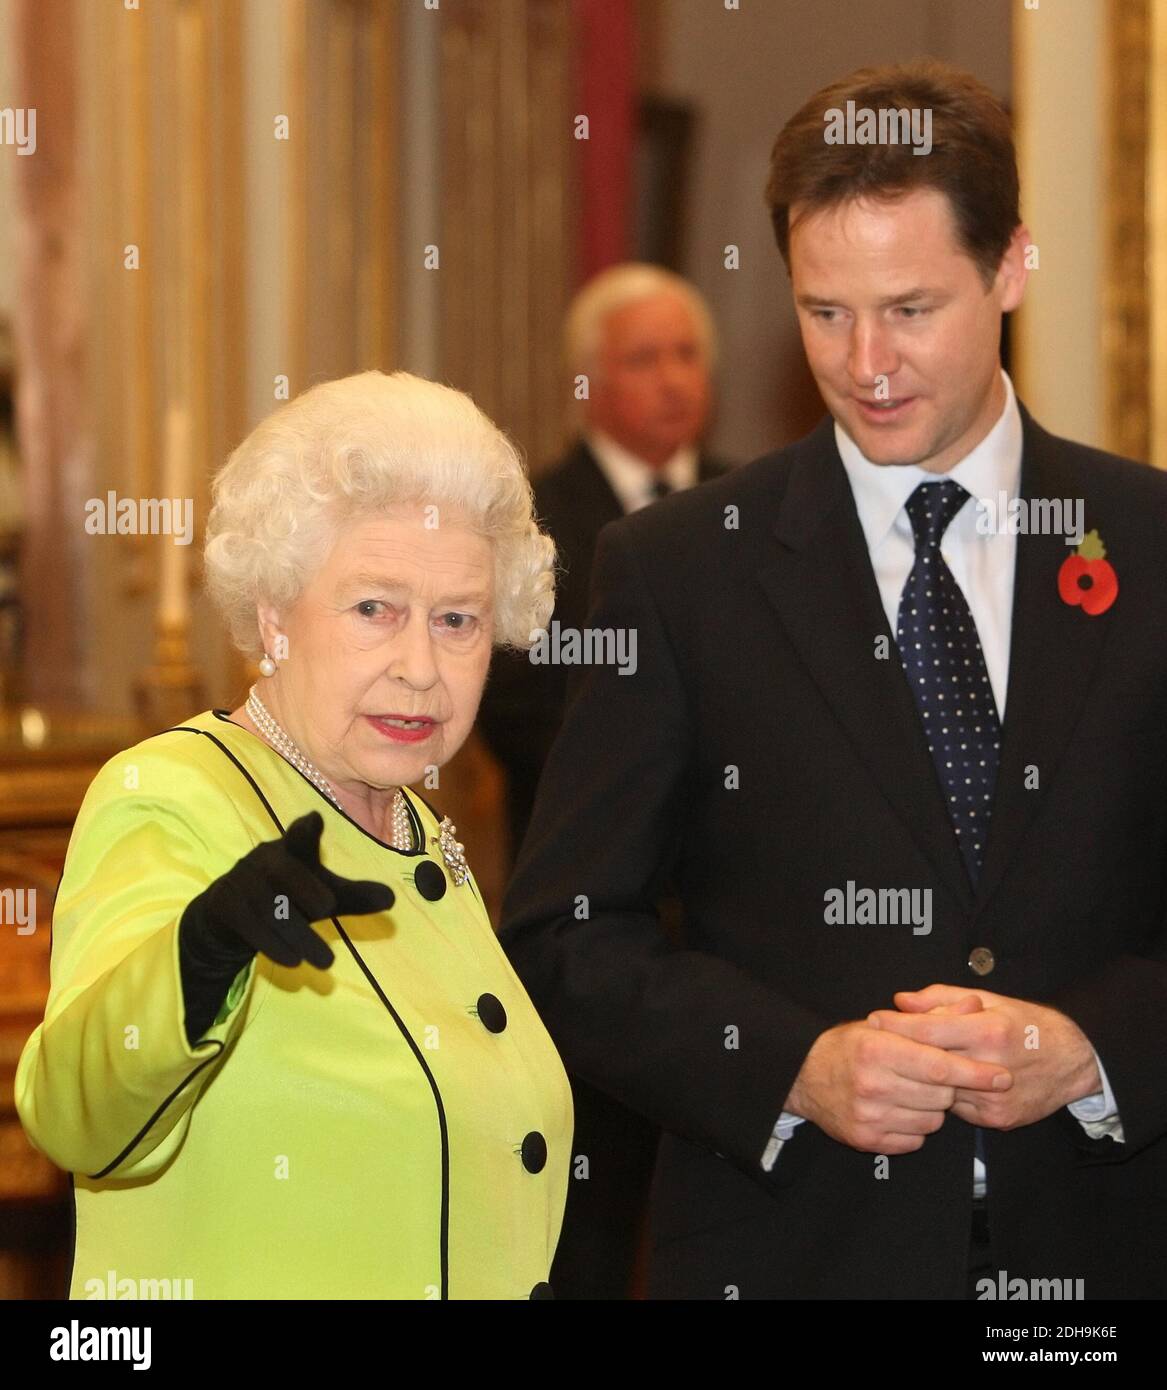 File photo dated 11/11/2010 of Queen Elizabeth II speaks to Nick Clegg at the annual Civil Service Awards Reception, at Buckingham Palace, London. The Queen's weekly audience with the Prime Minister was postponed this week to allow Boris Johnson to focus on the race against the clock to secure a post-Brexit trade agreement. Stock Photo